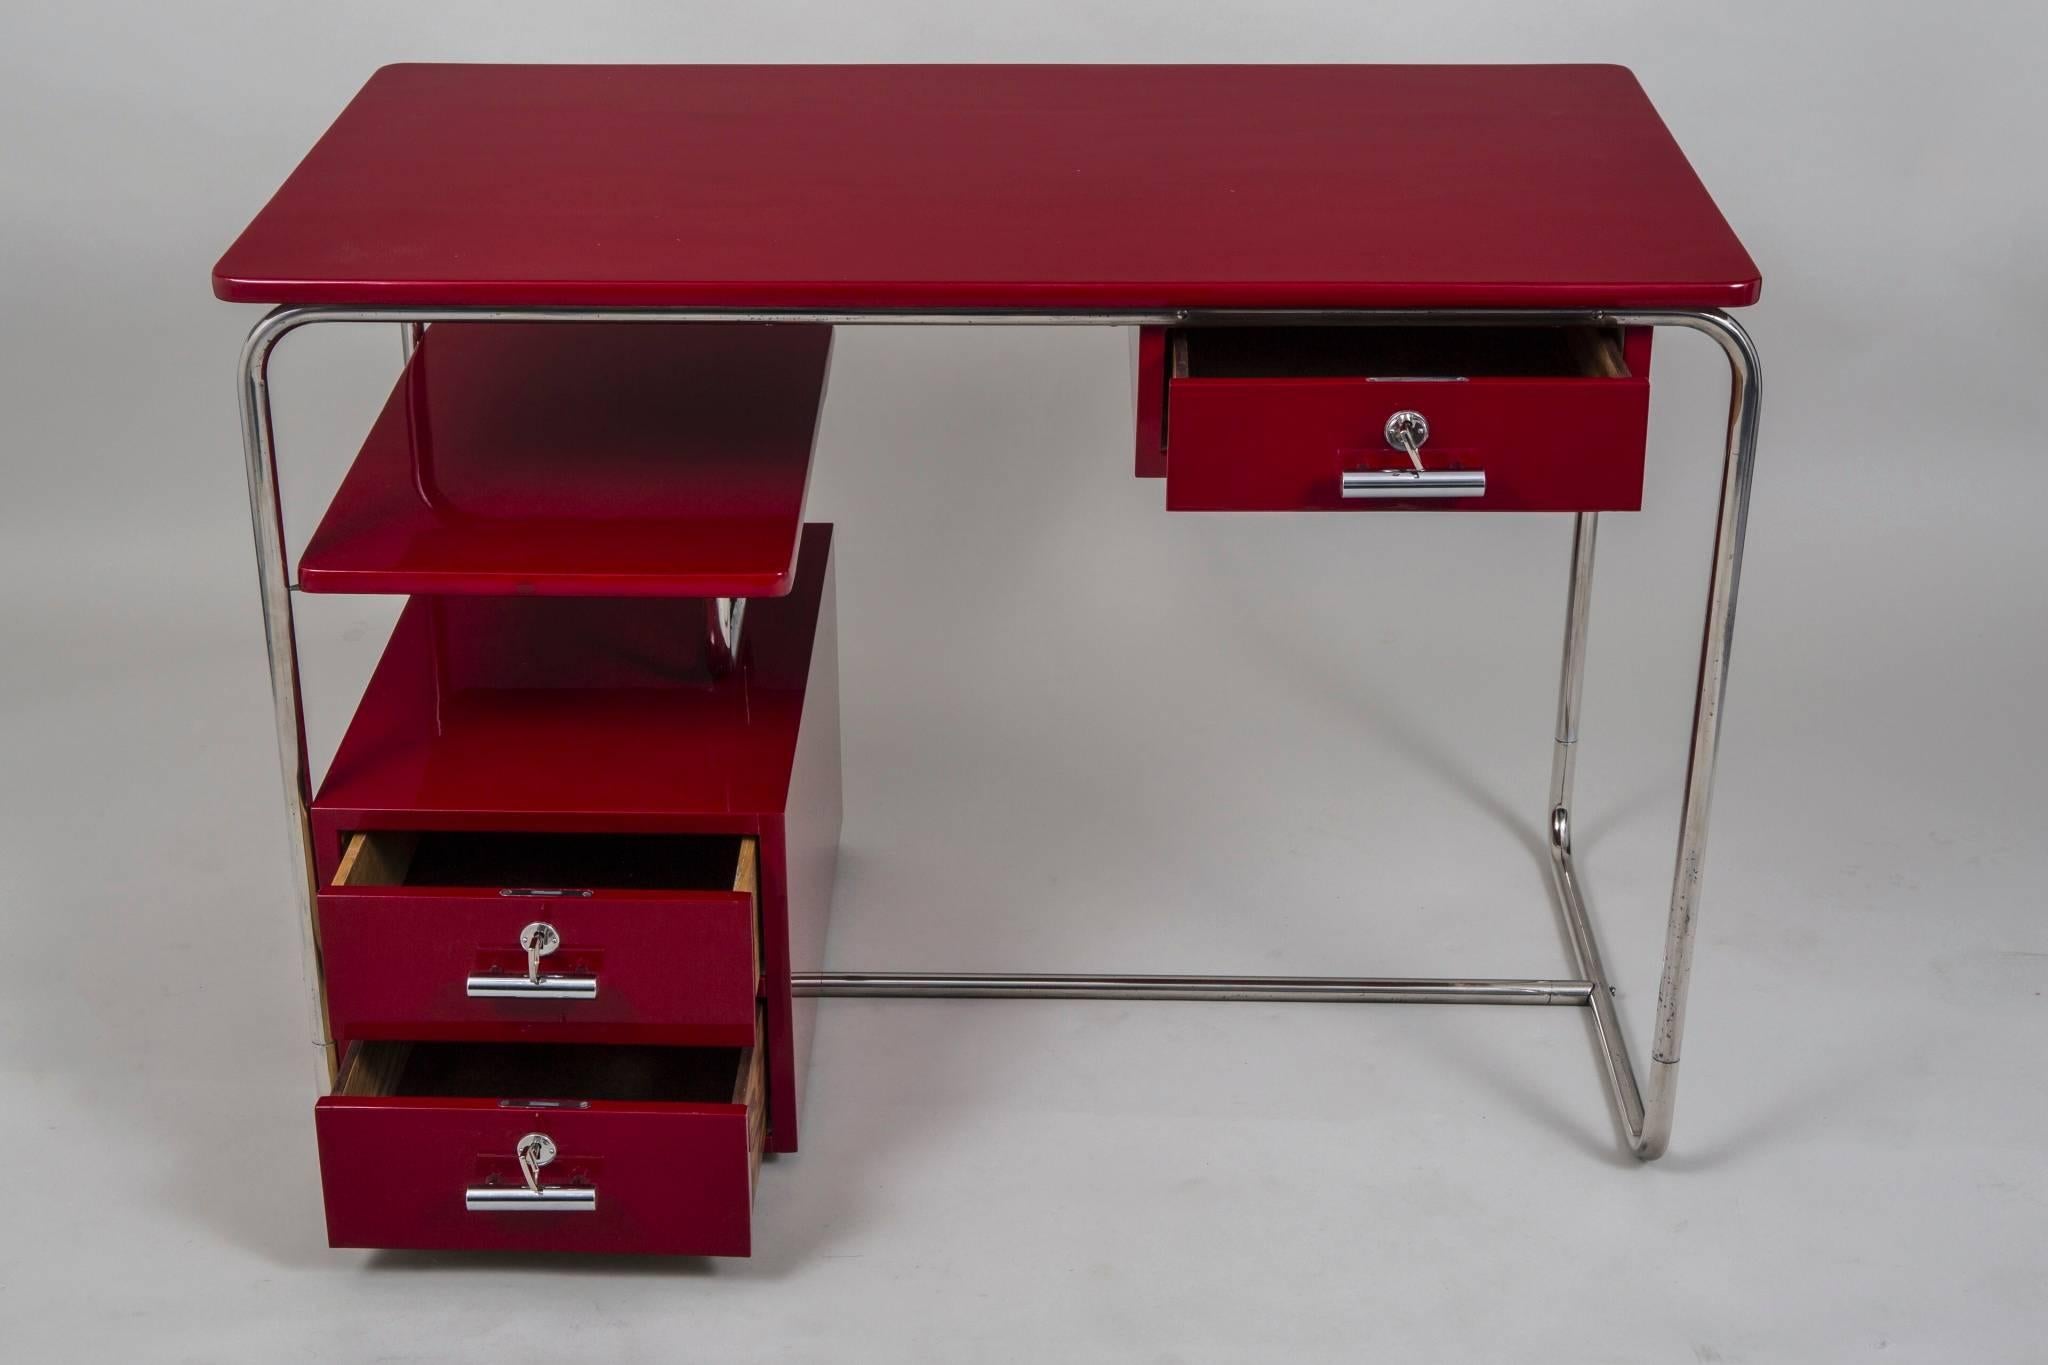 Writing desk made in Germany
Material: Chrome
Completely restored.

We guarantee safe a the cheapest air transport from Europe to the whole world within 7 days.
The price is the same as for ship transport but delivery time is really shorter.
We